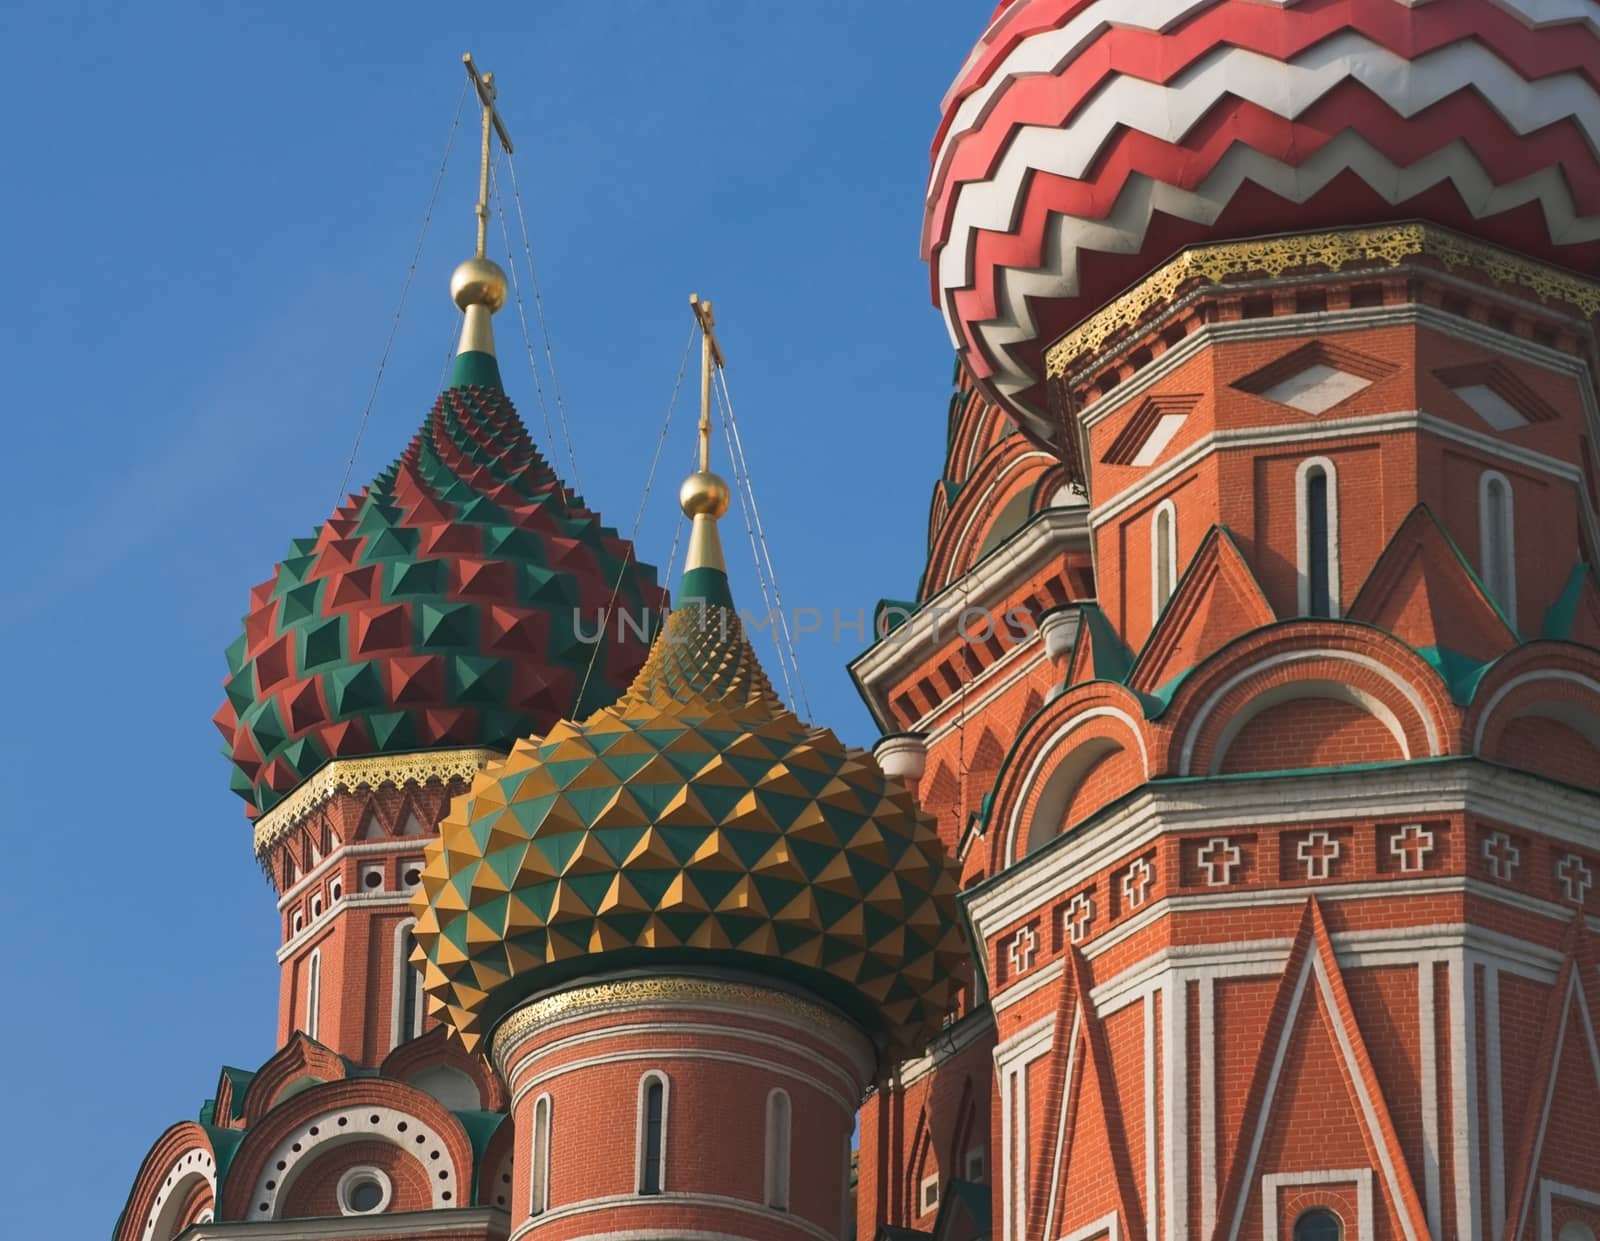 Domes of St. Basil's Cathedral by glassbear